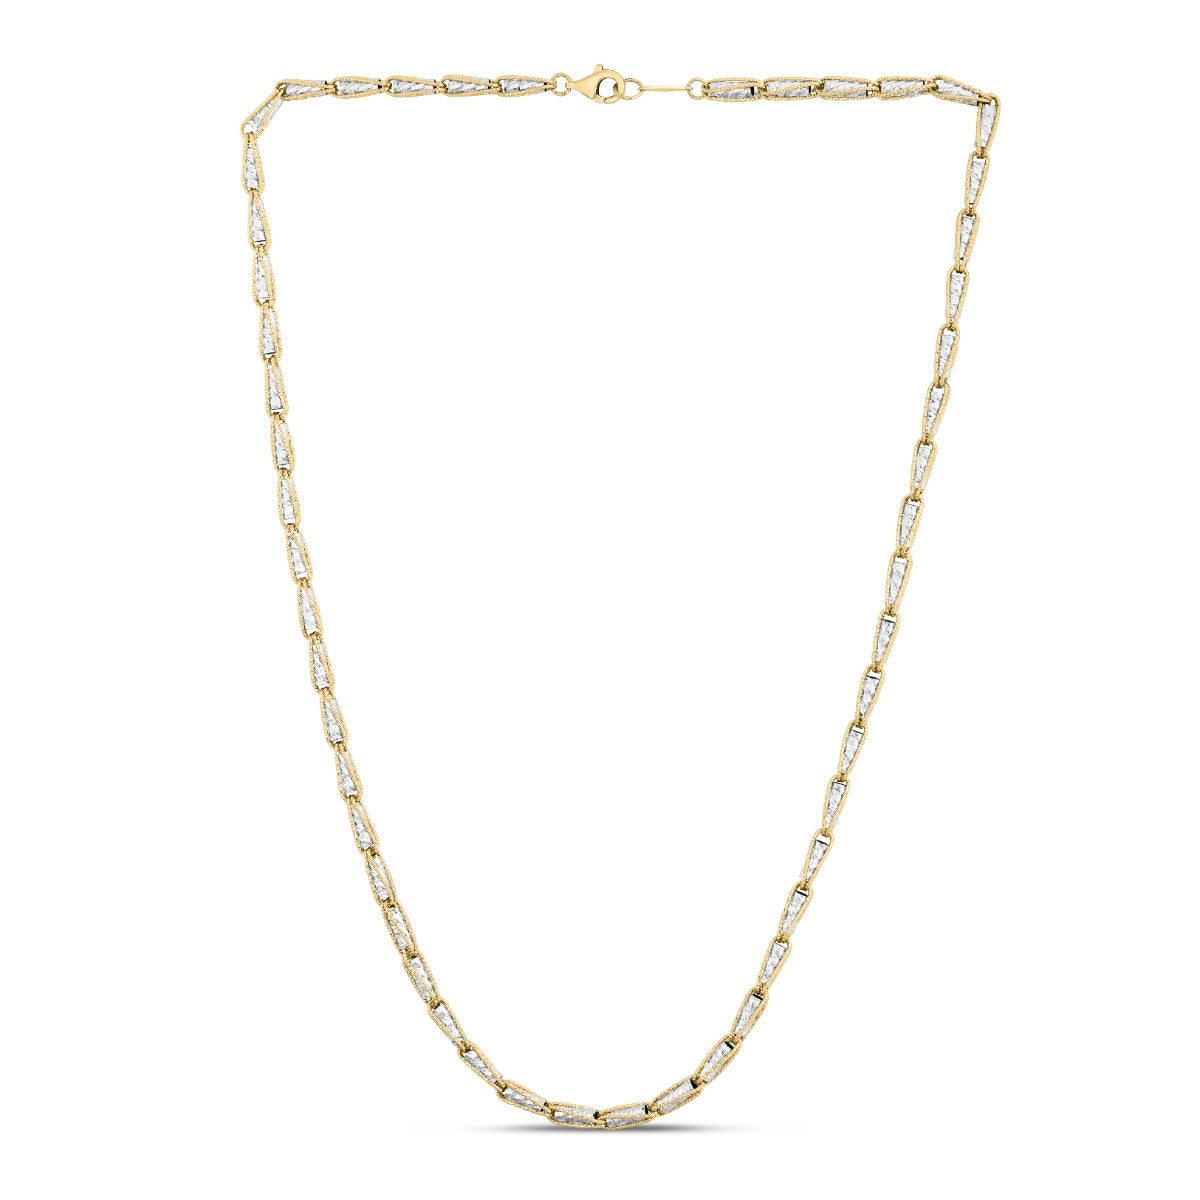 Two-tone 14K Gold Diamond Cut Link Chain Necklace with Lobster Clasp